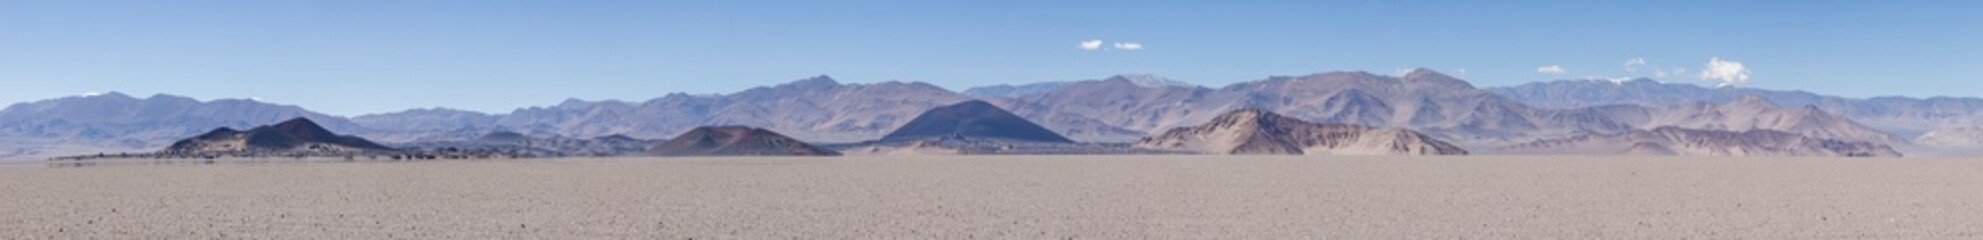 Off road adventure in the deserted and bizarre, but beautiful highlands of northern Argentina, South America - traveling and exploring the Puna - Panorama